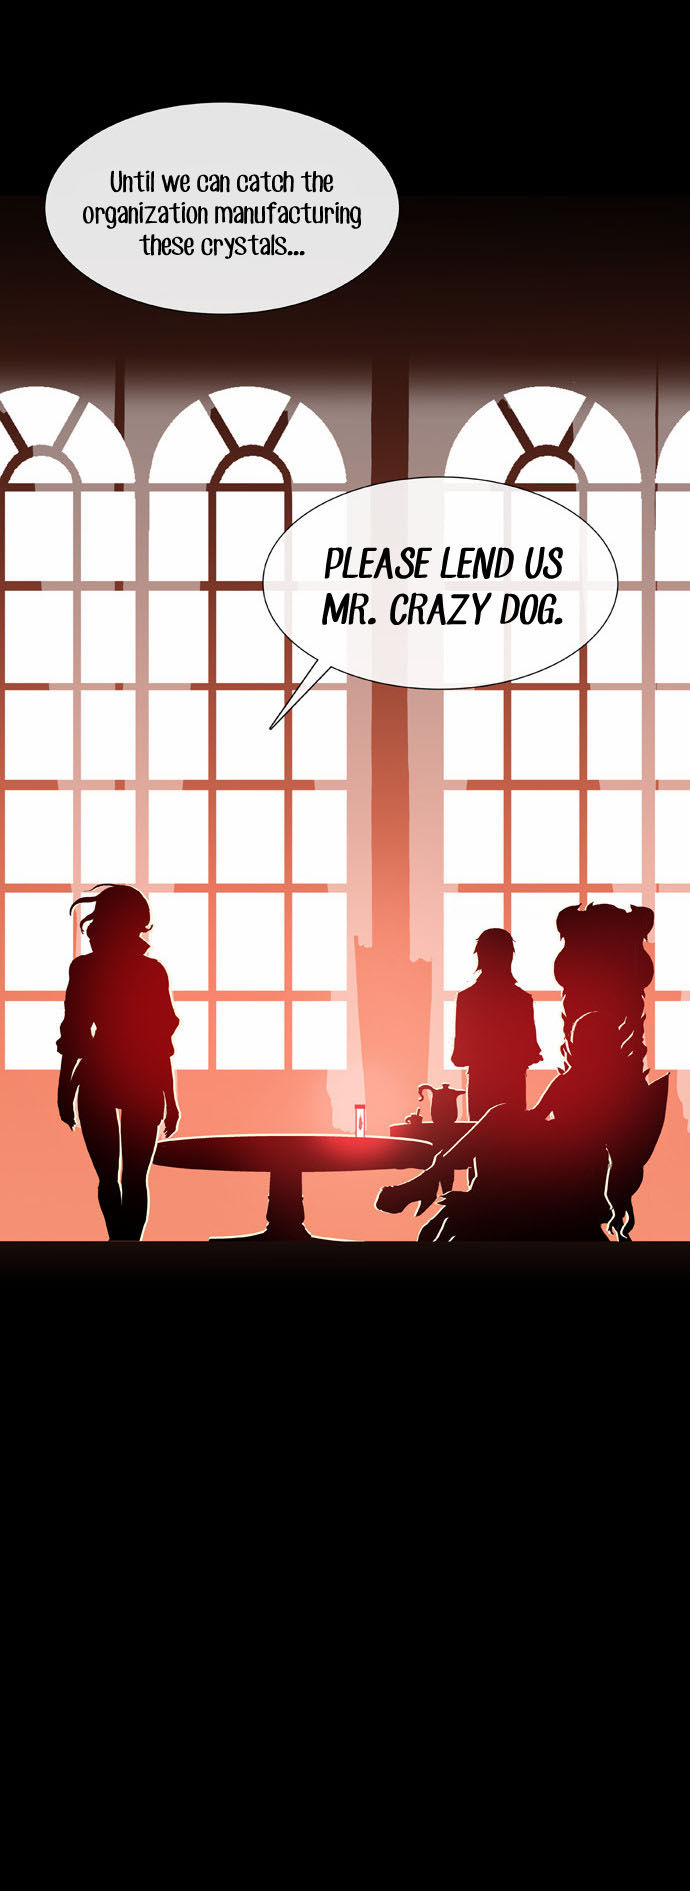 Red Doll Ch.6